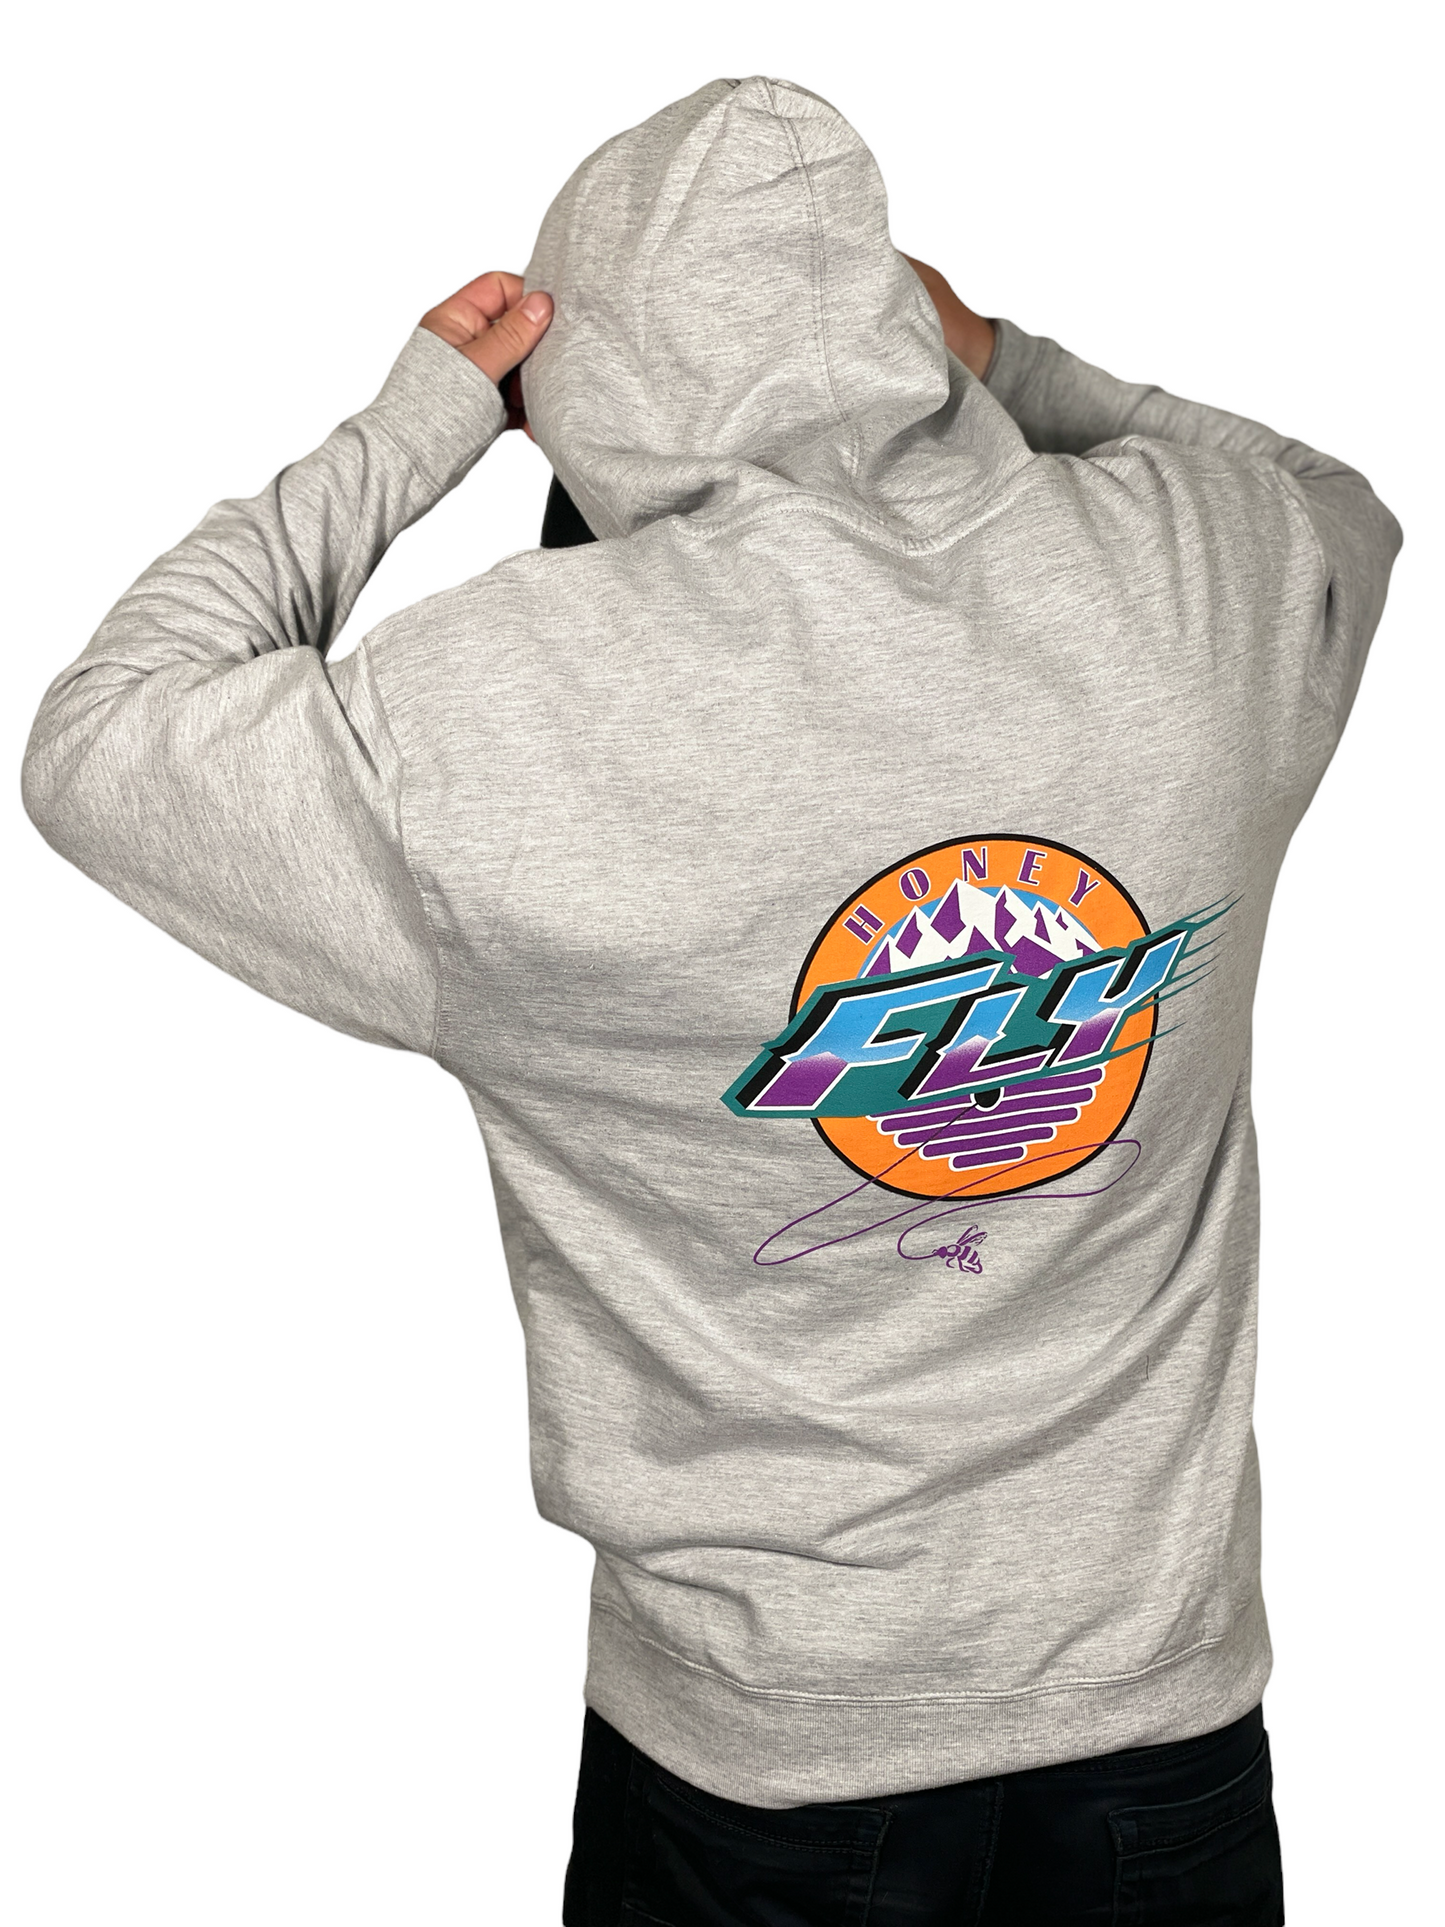 Fly Fishing On The Middle Provo Adult Pull-Over Hoodie by Wray